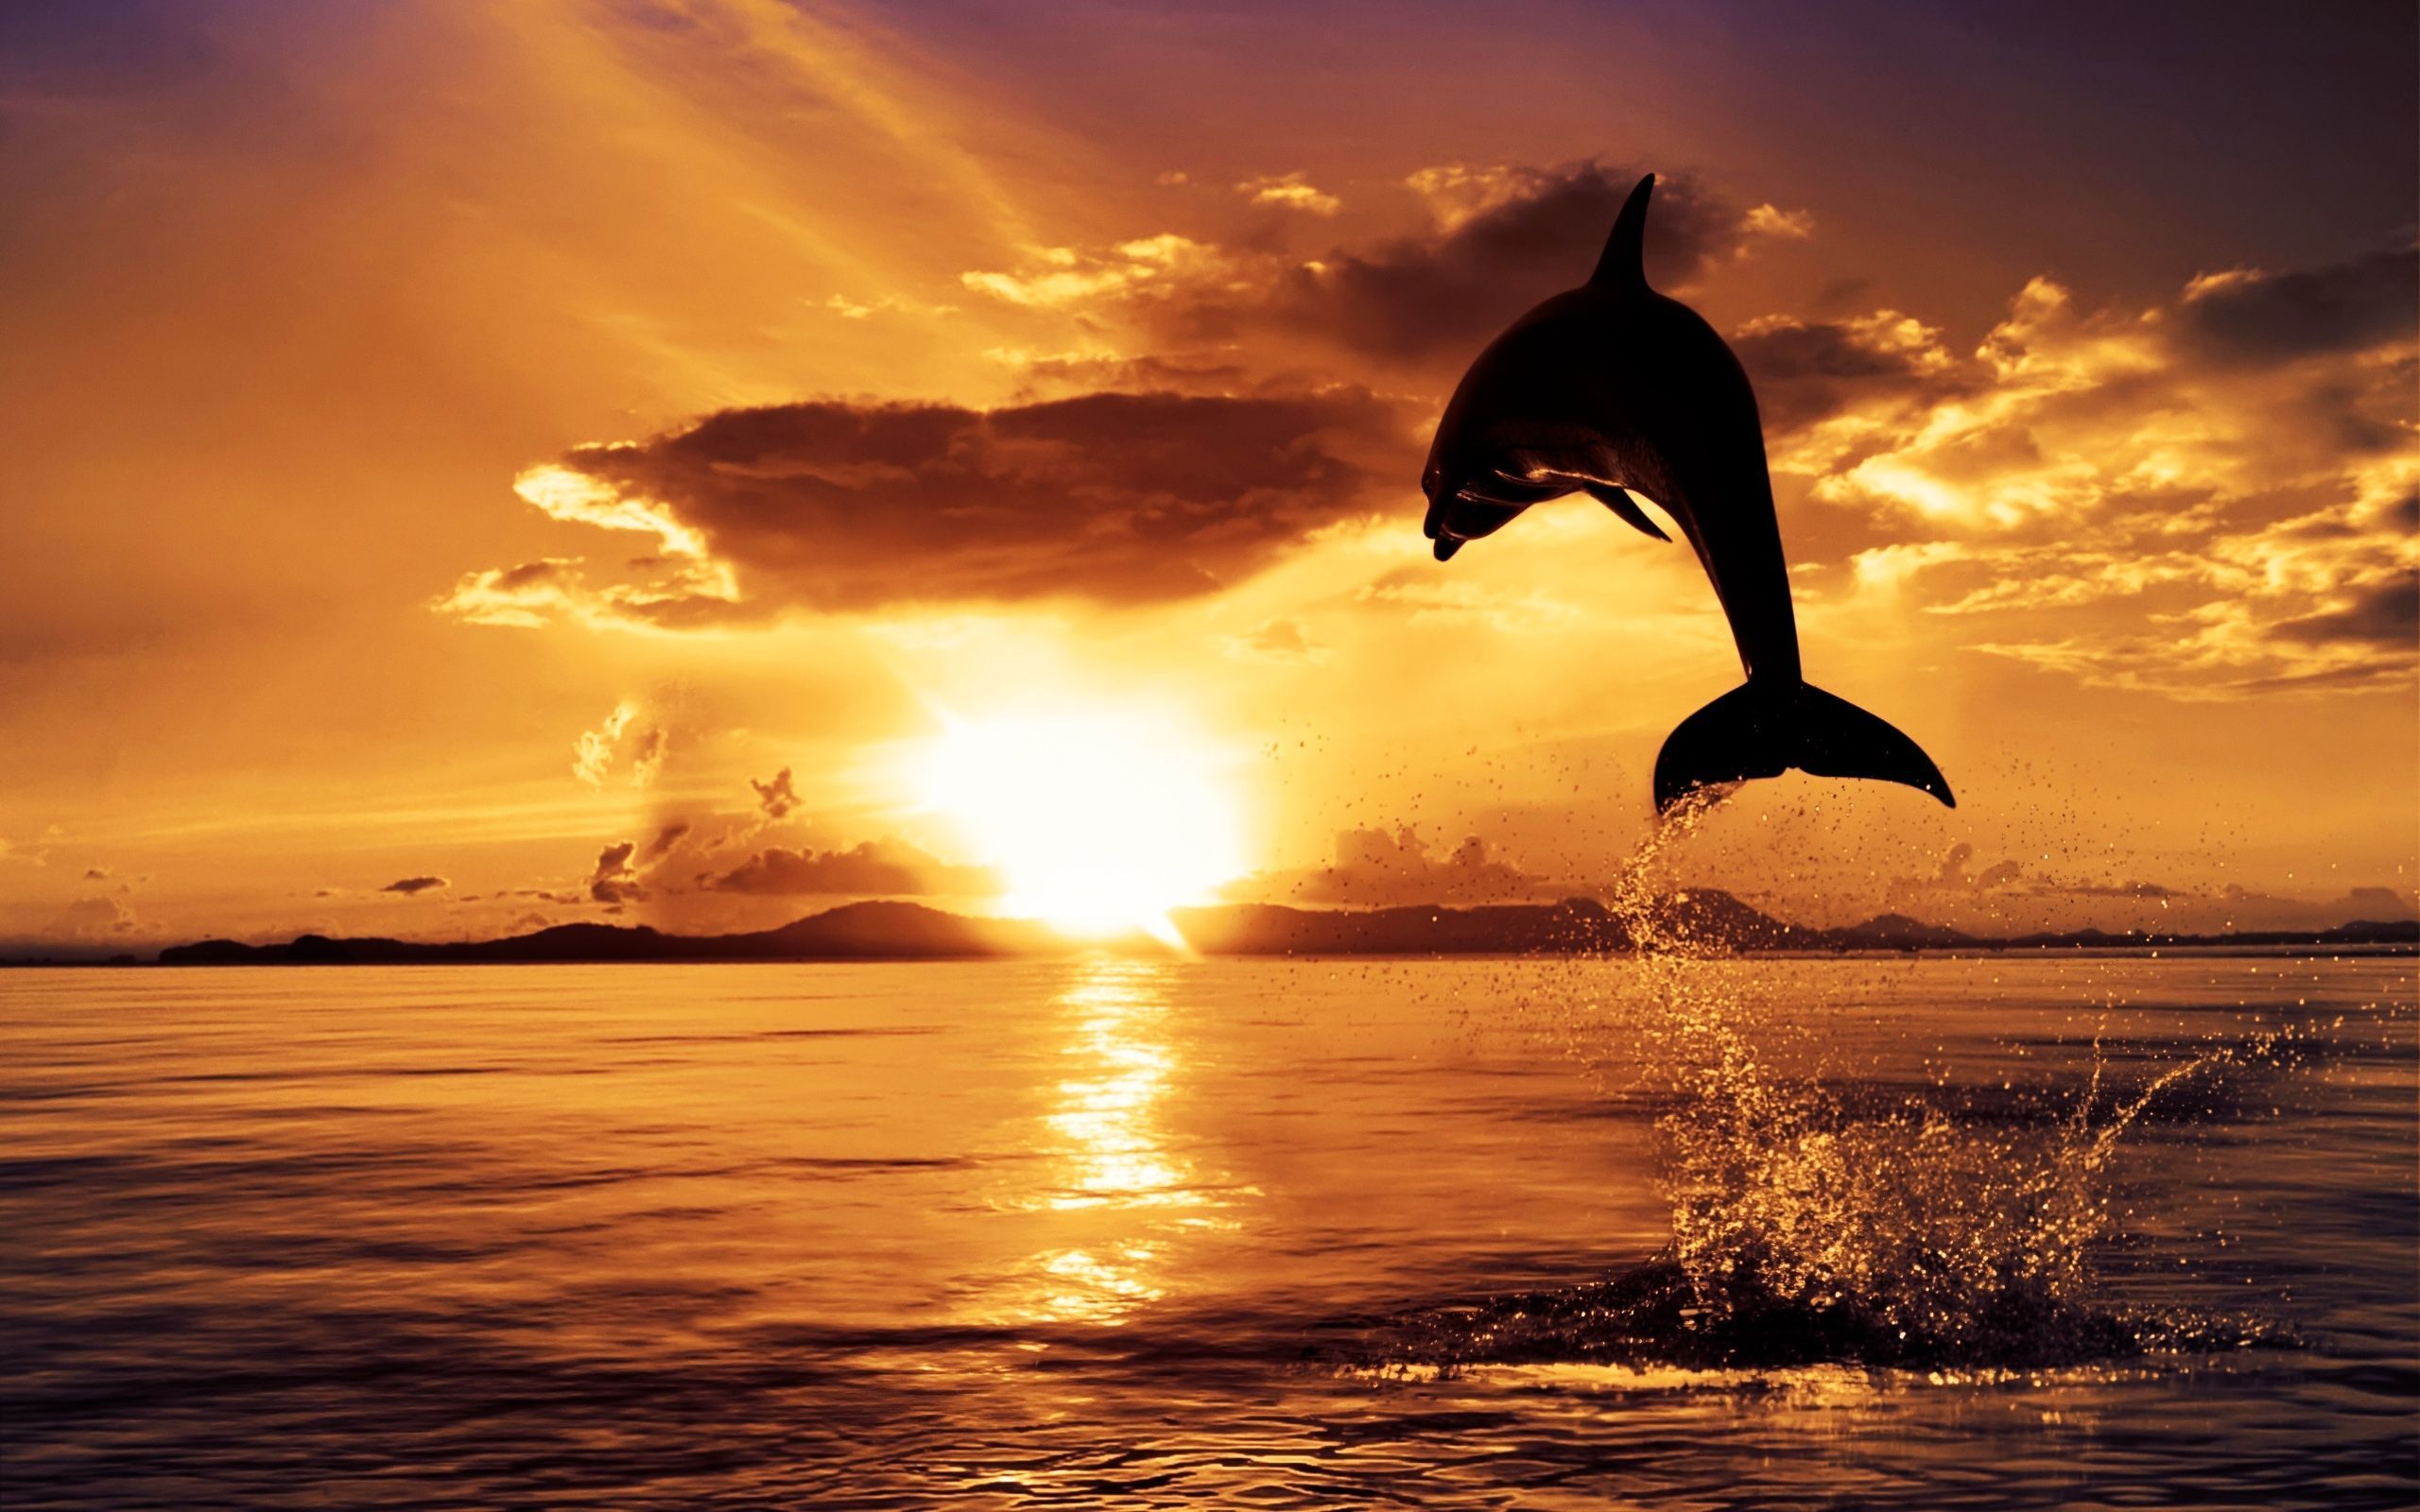 Dolphins Leap At Sunset Wallpaper Images Wallpaper High resolution